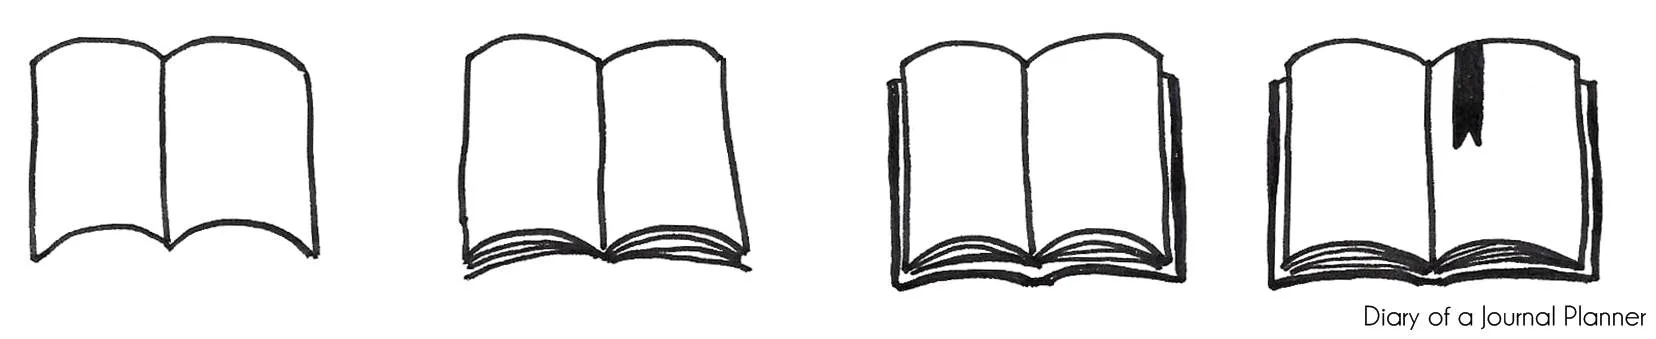 How to Draw a Book Easy  Open book drawing, Book drawing, Pencil drawings  easy